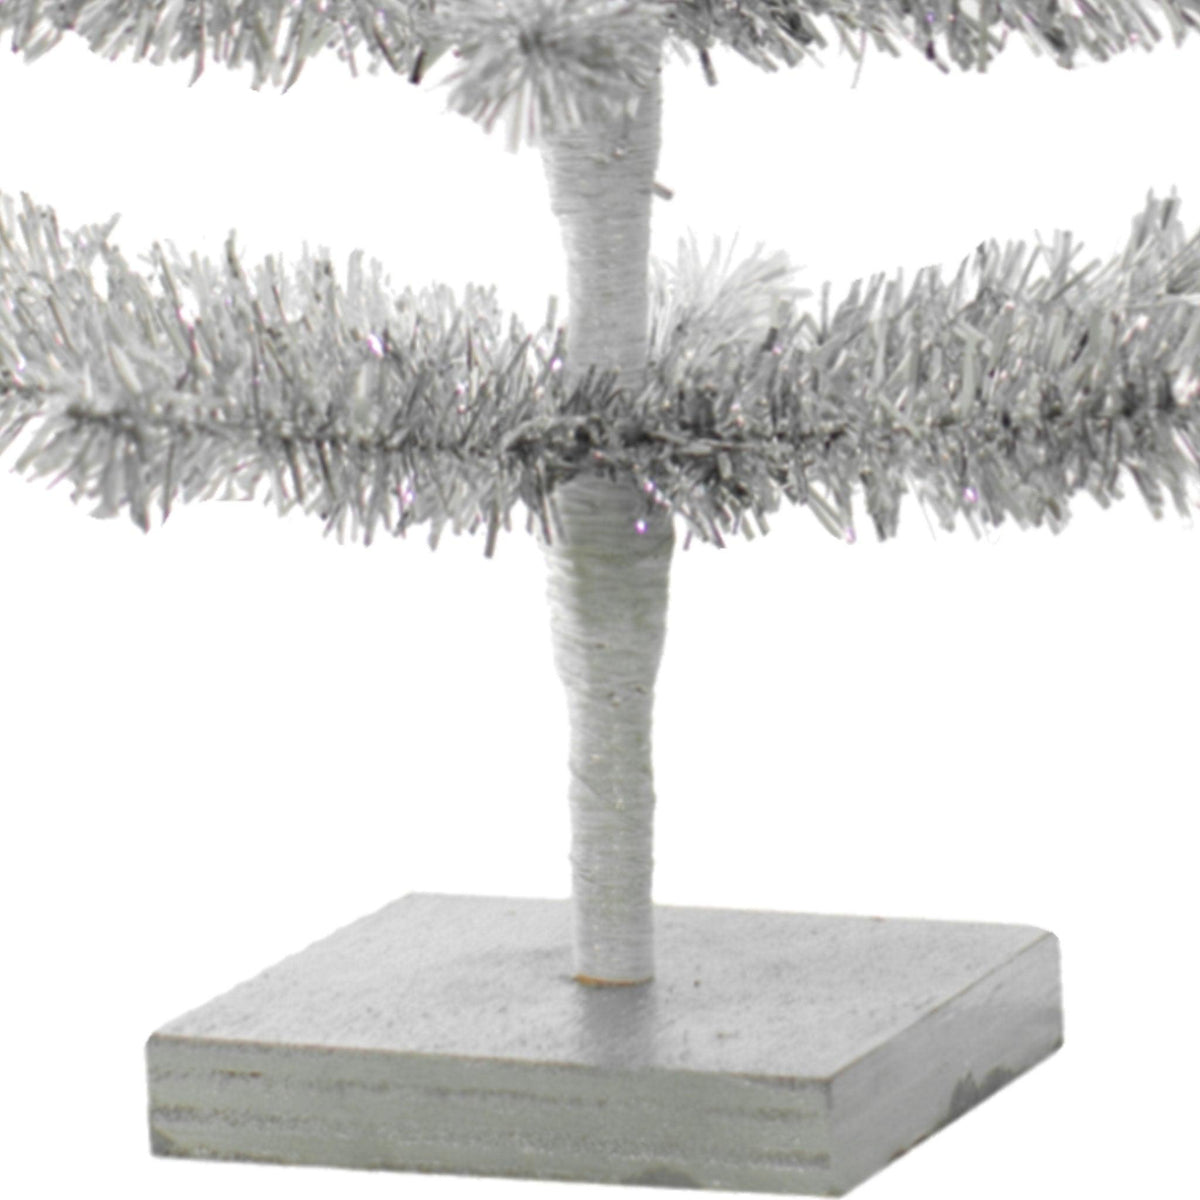 Bottom of the 1in thin brush Silver Tinsel Christmas Tree sold at leedisplay.com